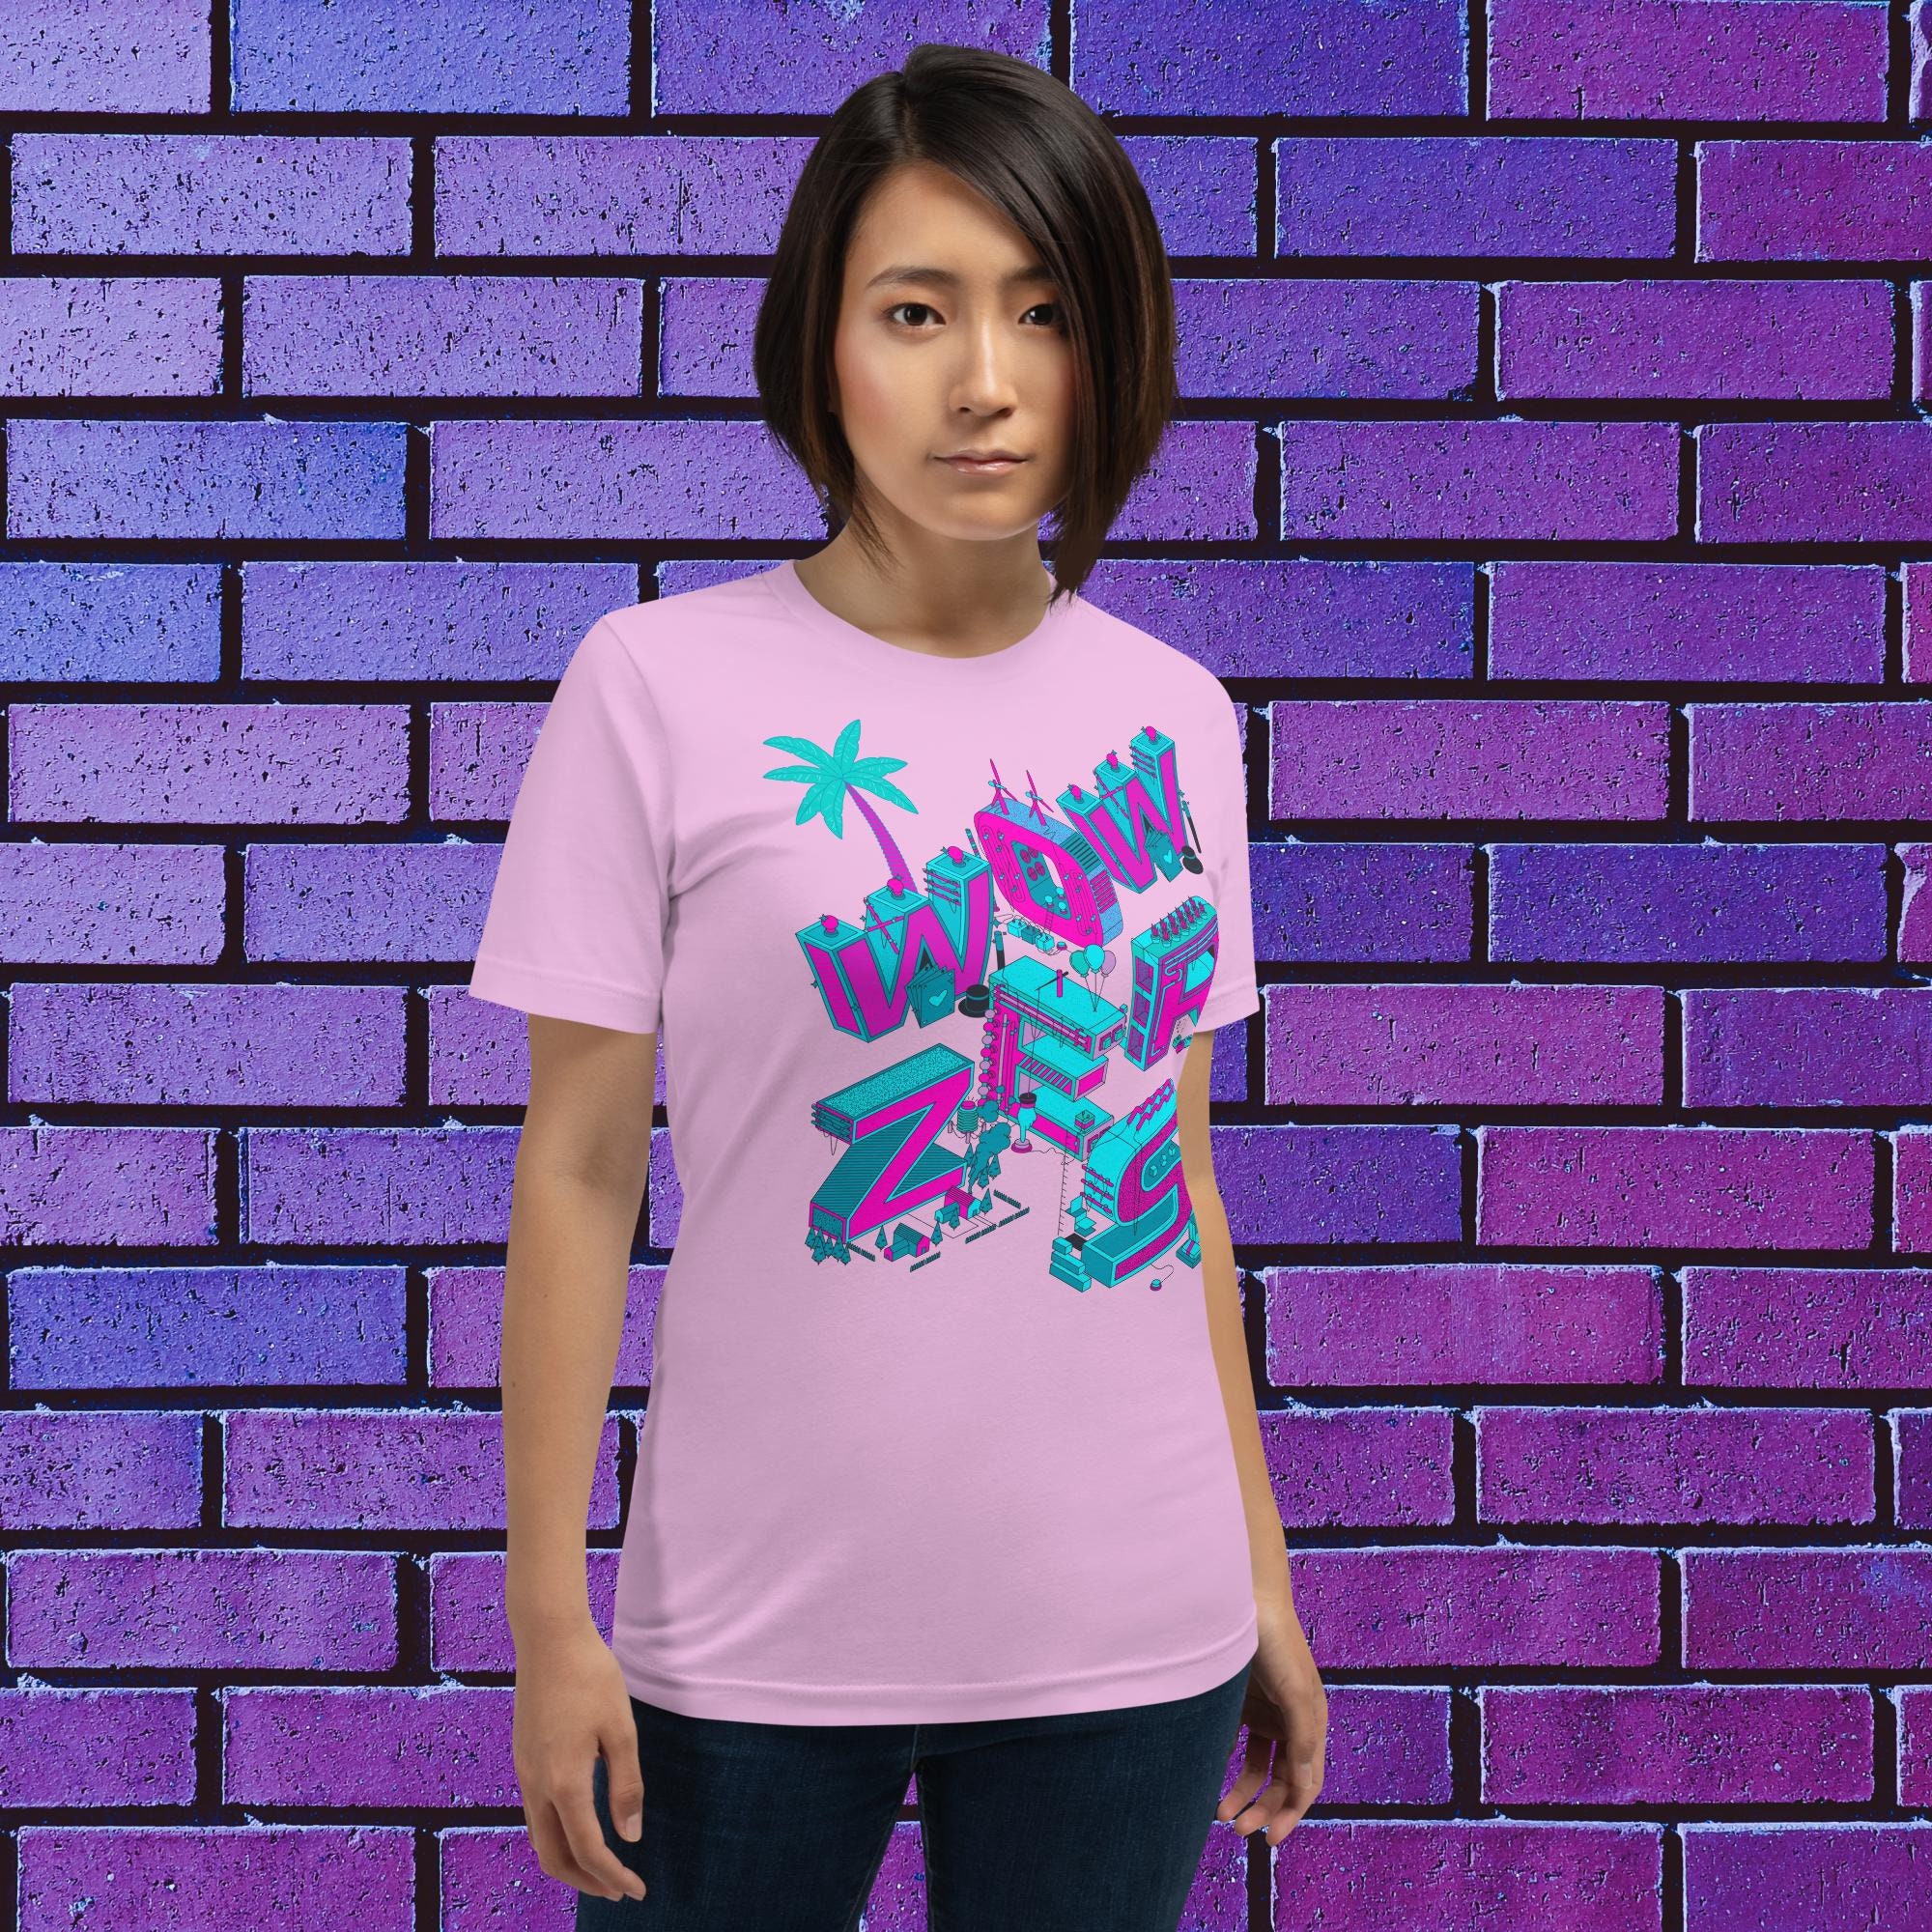 Bzdaisy ROBLOX T-Shirt - Perfect for Gaming Fans - Cool Design and